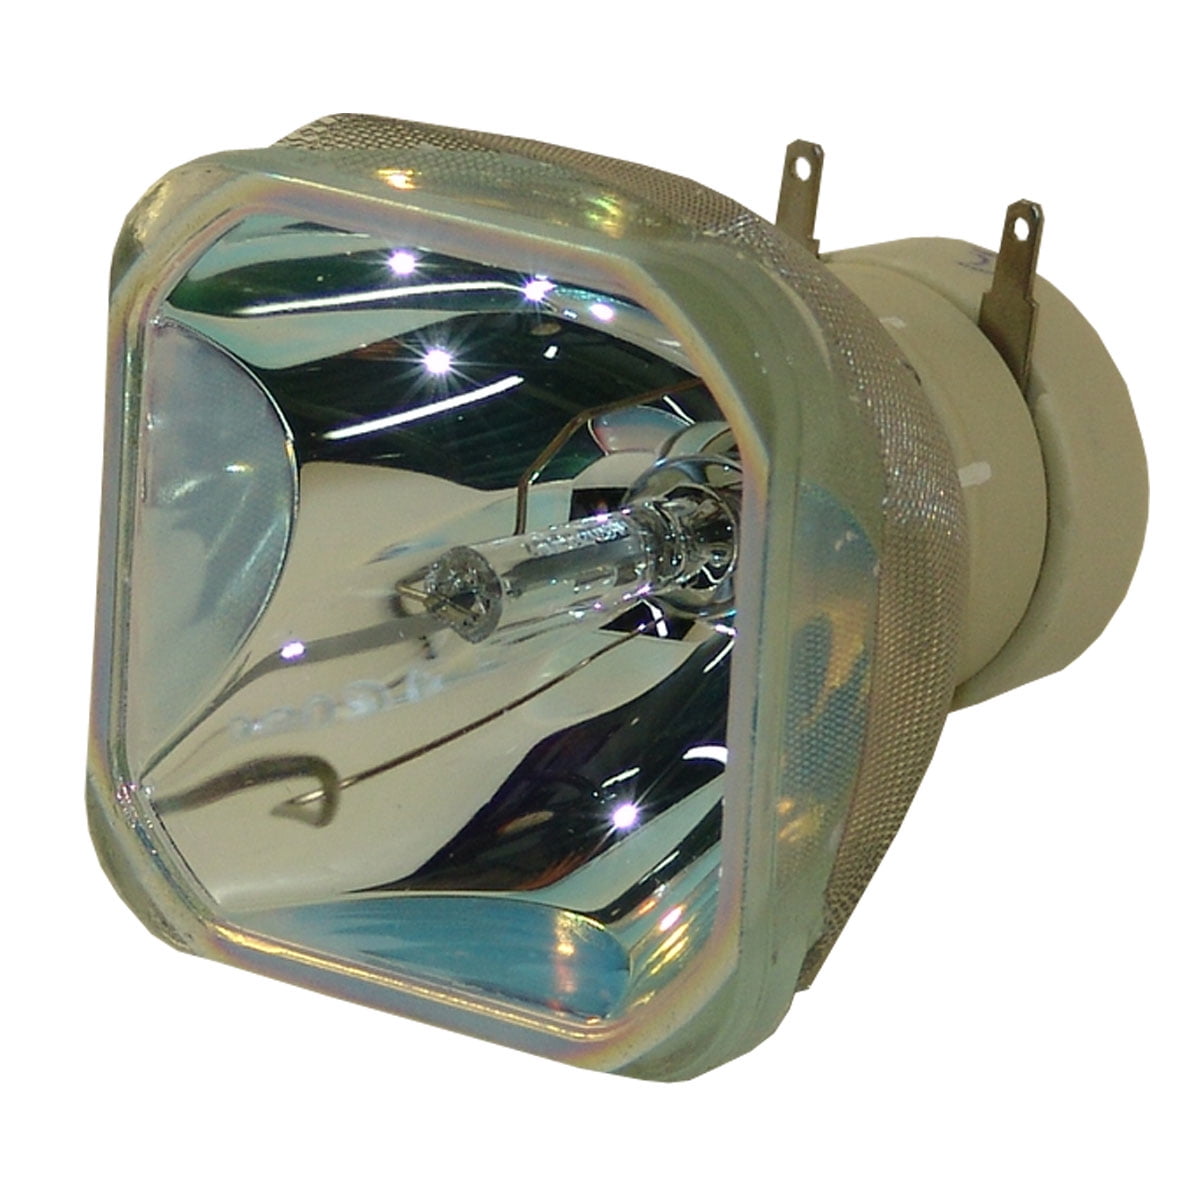 DT01191 Projector Lamp with Housing for Hitachi CP-X2521WN /X2521 /WX12WN /X10WN /X11WN /X2021 /U25S /U26W /U27N Projector 